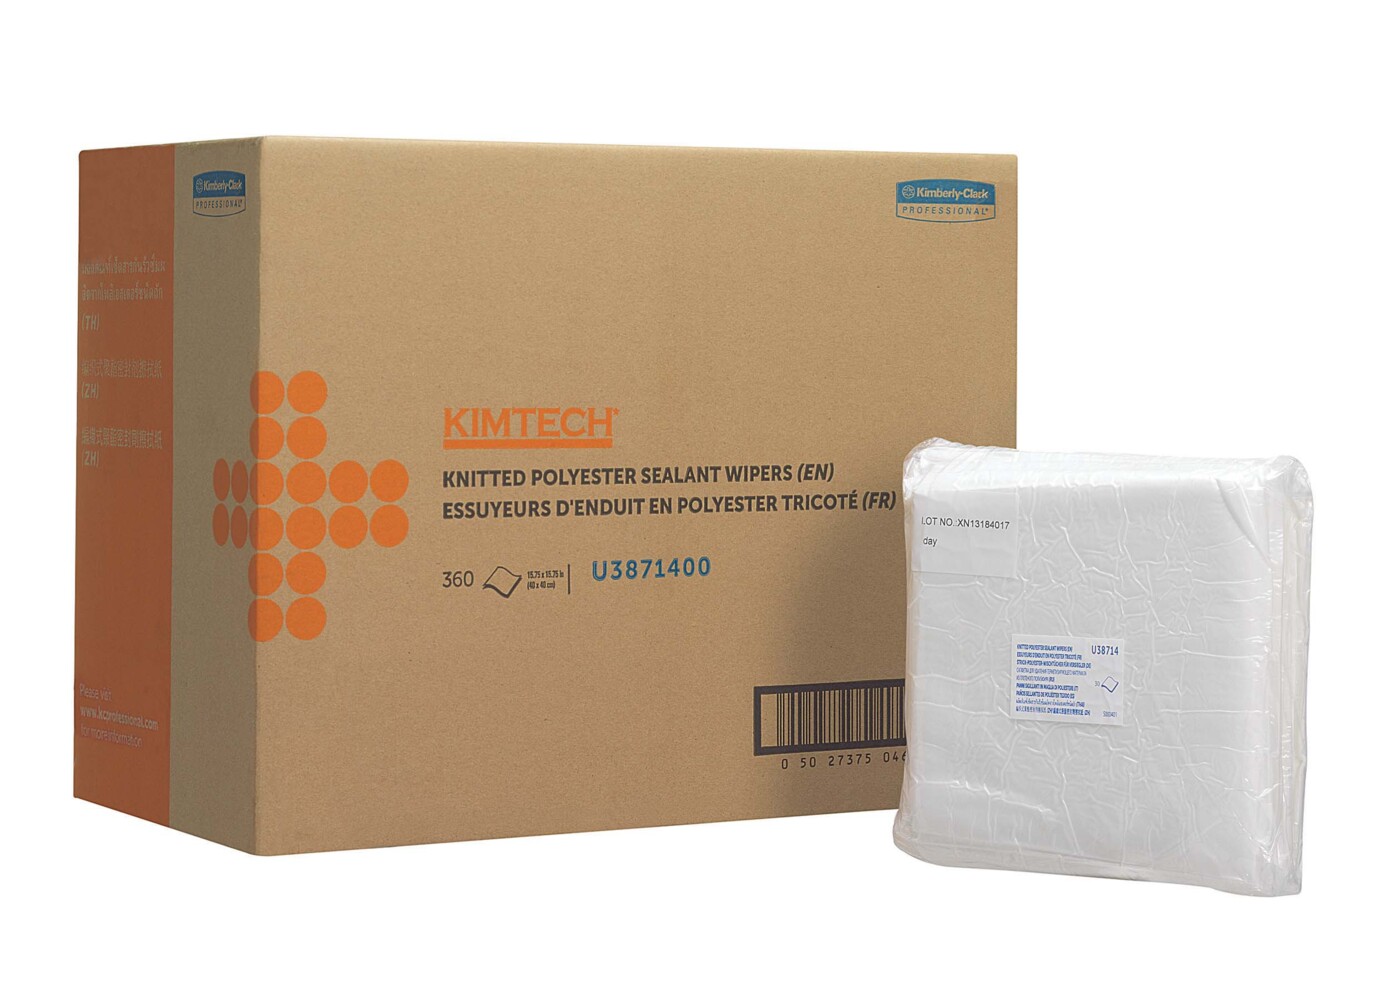 Kimtech® Auto Polyester Sealant Wipers 38714 - 30 unfolded, white sheets per pack (box contains 12 packs) - 38714